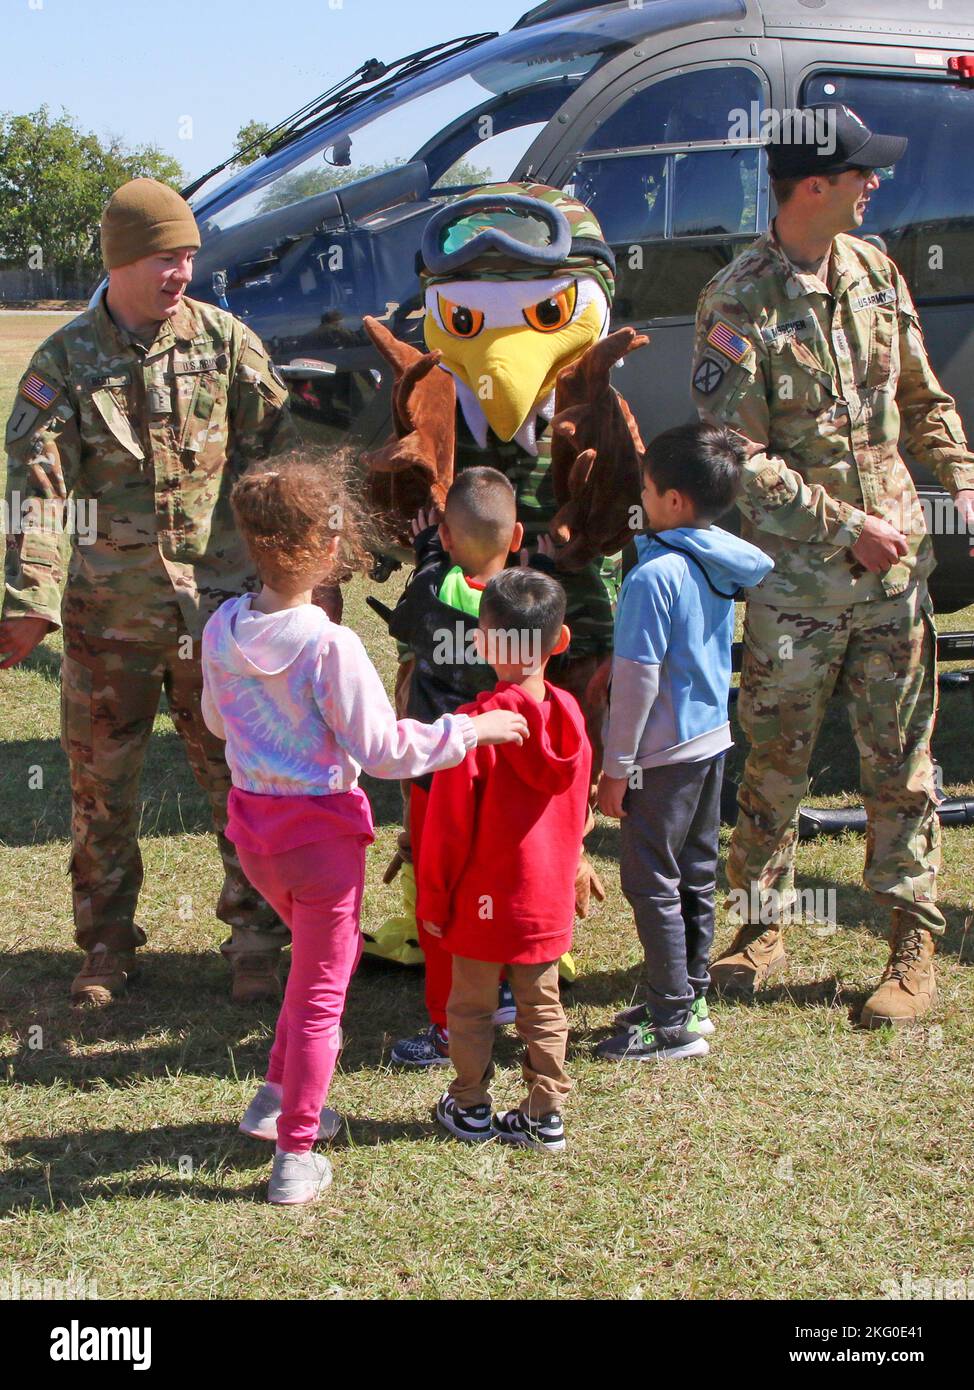 AUSTIN, Texas —A special agent from the U.S. Drug Enforcement Administration speaks with children at Cottonwood Creek Elementary School Oct. 18, 2022, in Hutto, Texas, with support from the Texas National Guard Joint Counterdrug Task Force who brought a LUH-72 Lakota helicopter and their mascot, “Enney the Eagle,” to visit the school during Red Ribbon week activities. Every year, the Texas Counterdrug program supports DEA’s Red Ribbon awareness and prevention activities at schools around the state. Stock Photo